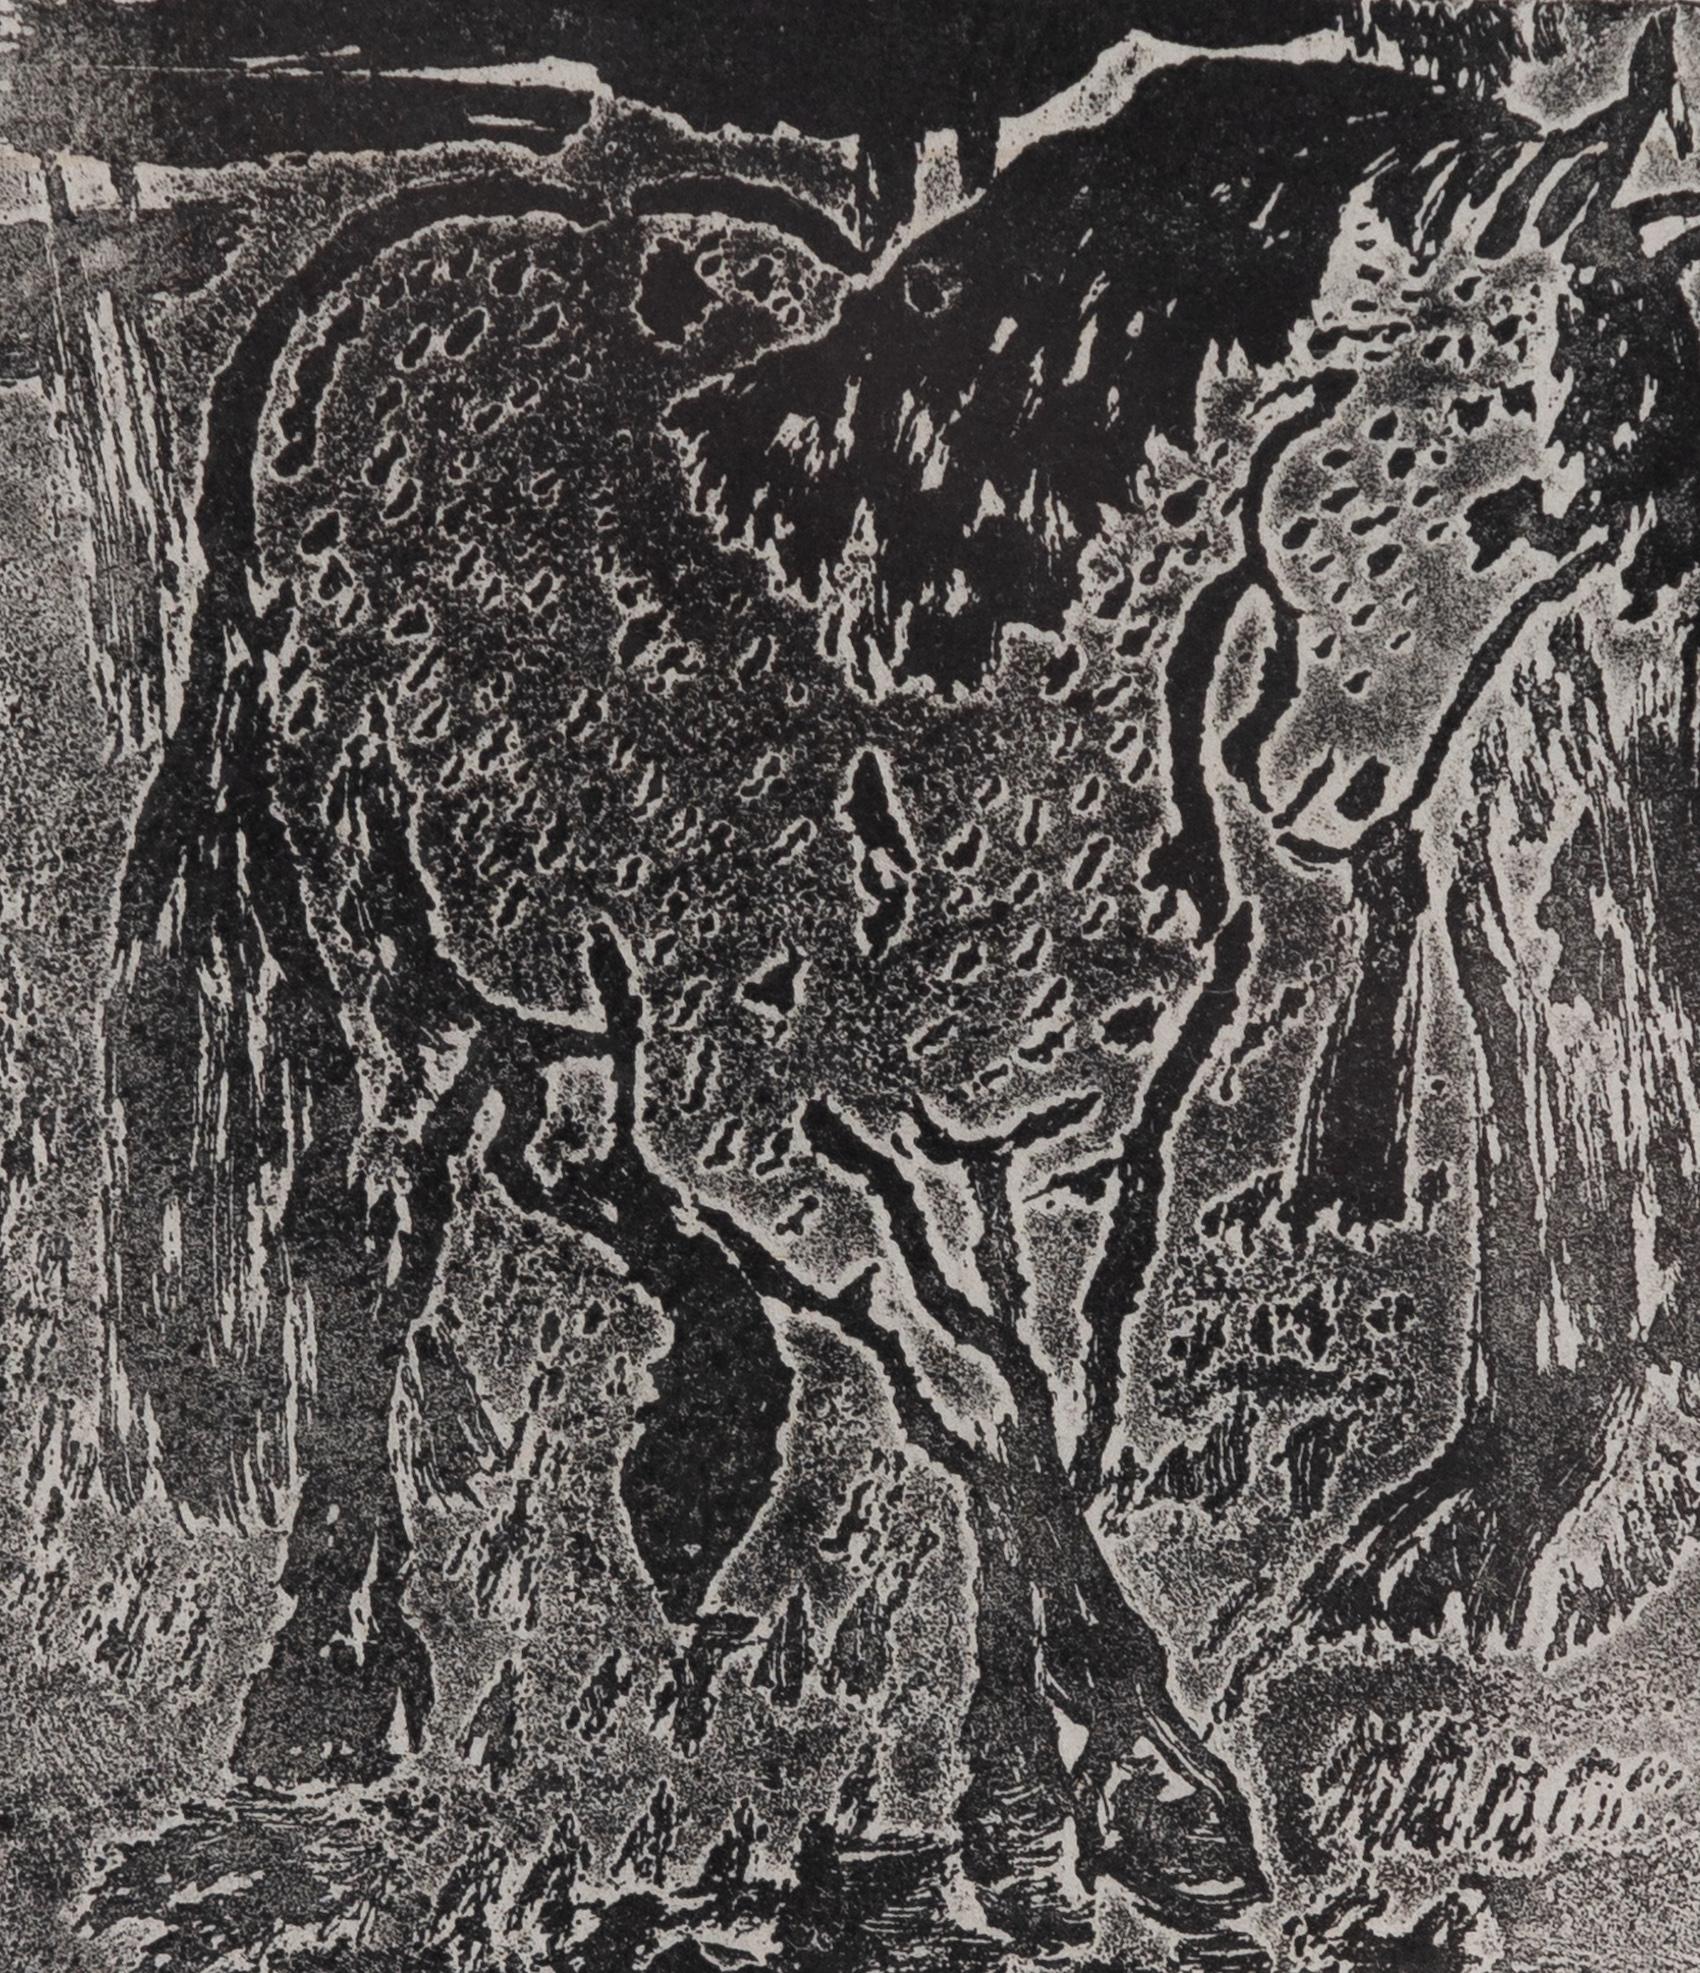 *UK BUYERS WILL PAY AN ADDITIONAL 20% VAT ON TOP OF THE ABOVE PRICE

Horse by Félix Pissarro (1874-1897)
Wood engraving
10 x 9 cm (4 x 3 ¹/₂ inches)

Artist biography:
Félix Pissarro, affectionately known to his family as “Titi”, was born in